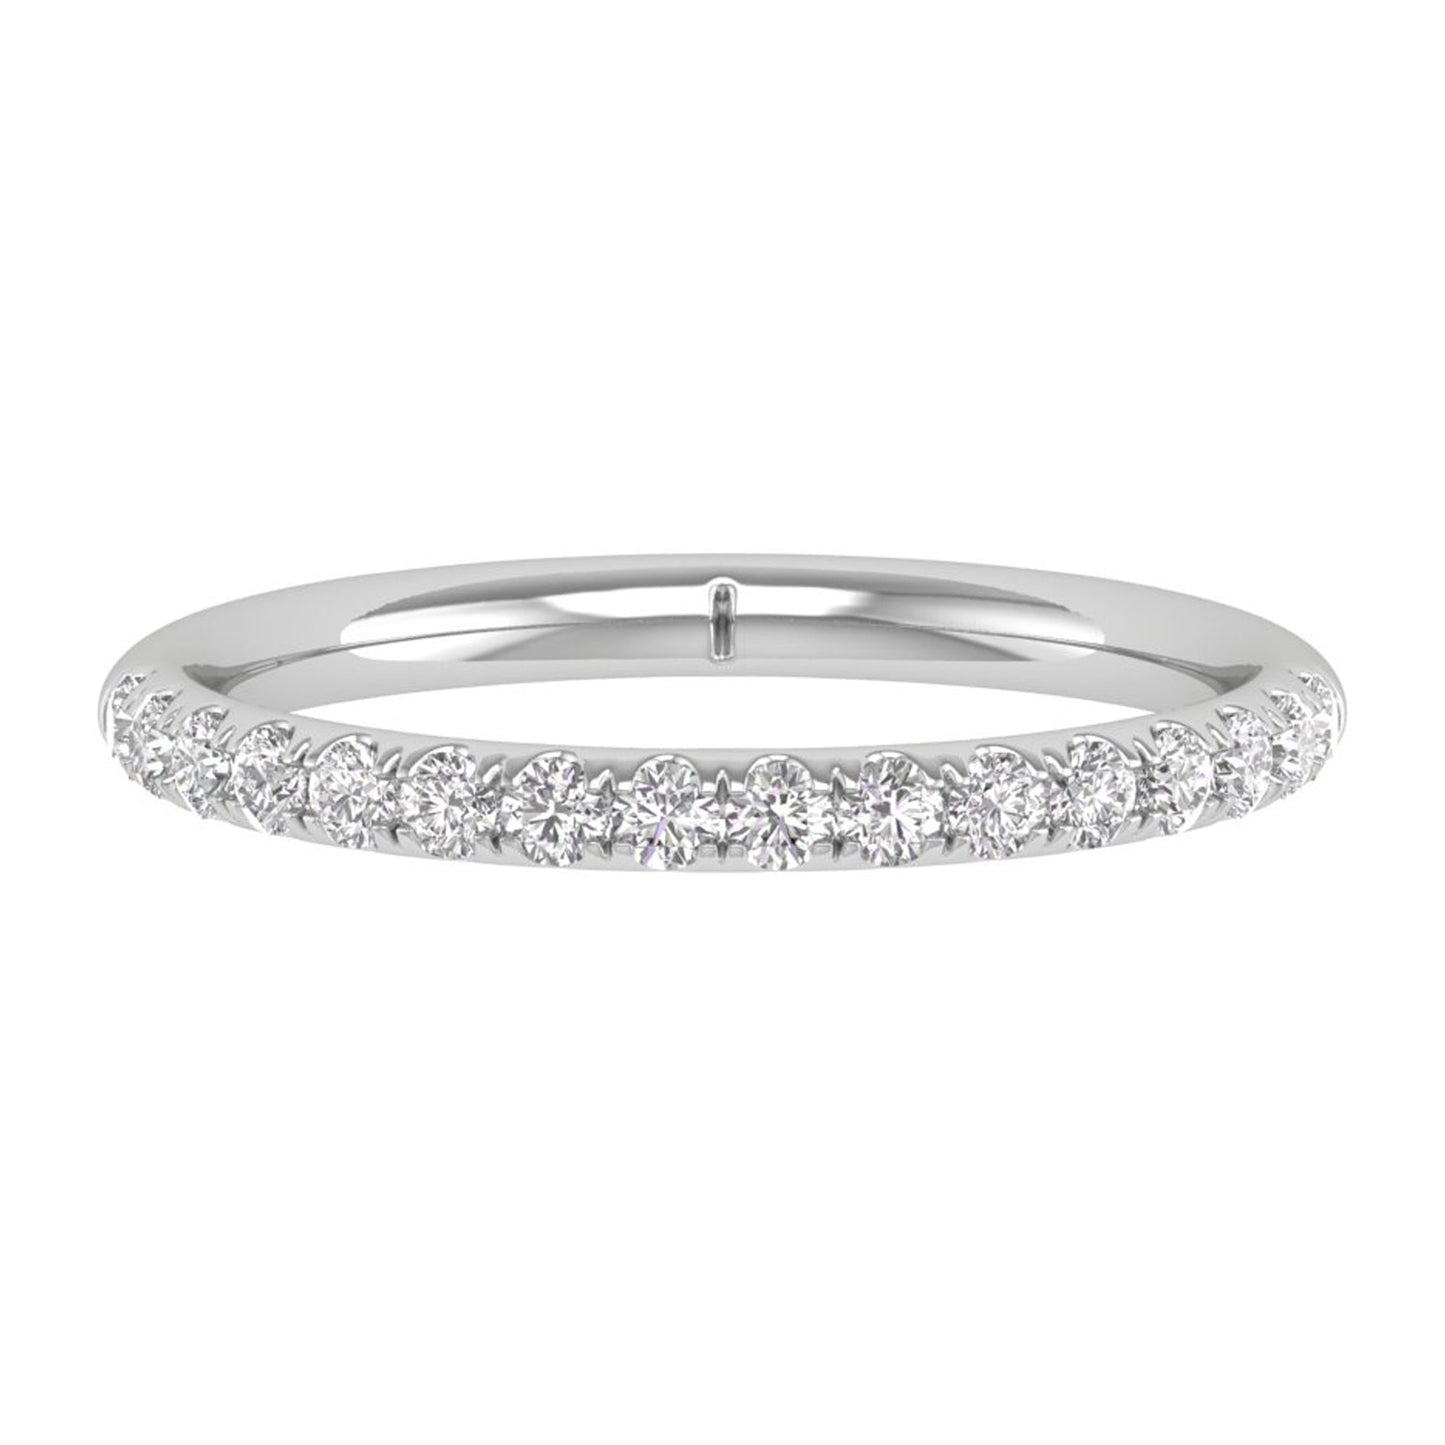 1/2 CTW COLORLESS FLAWLESS FRENCH PAVÉ WEDDING BAND